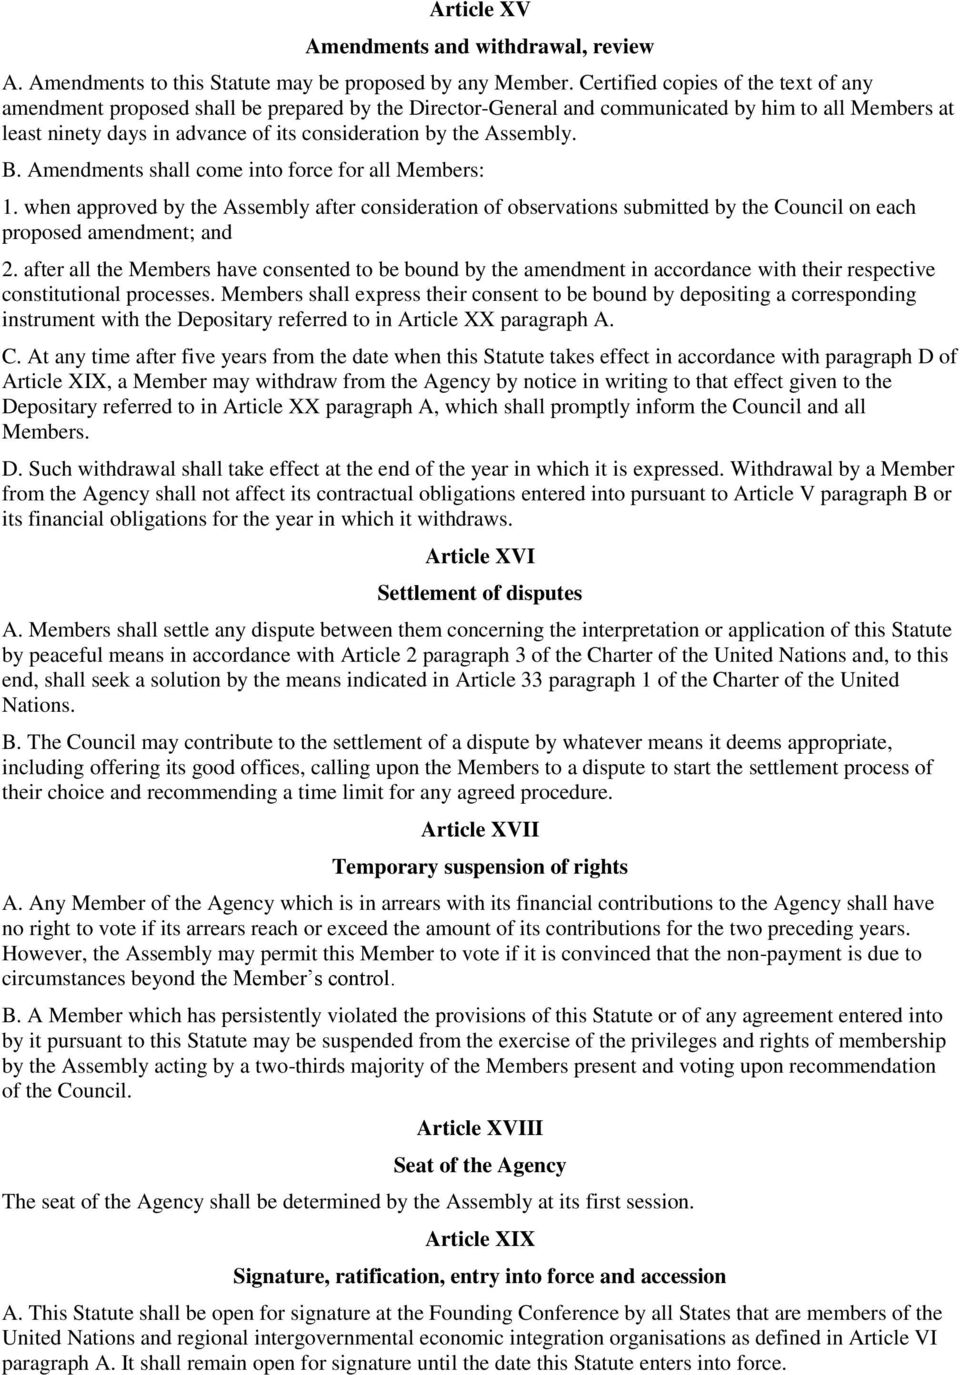 Assembly. B. Amendments shall come into force for all Members: 1. when approved by the Assembly after consideration of observations submitted by the Council on each proposed amendment; and 2.